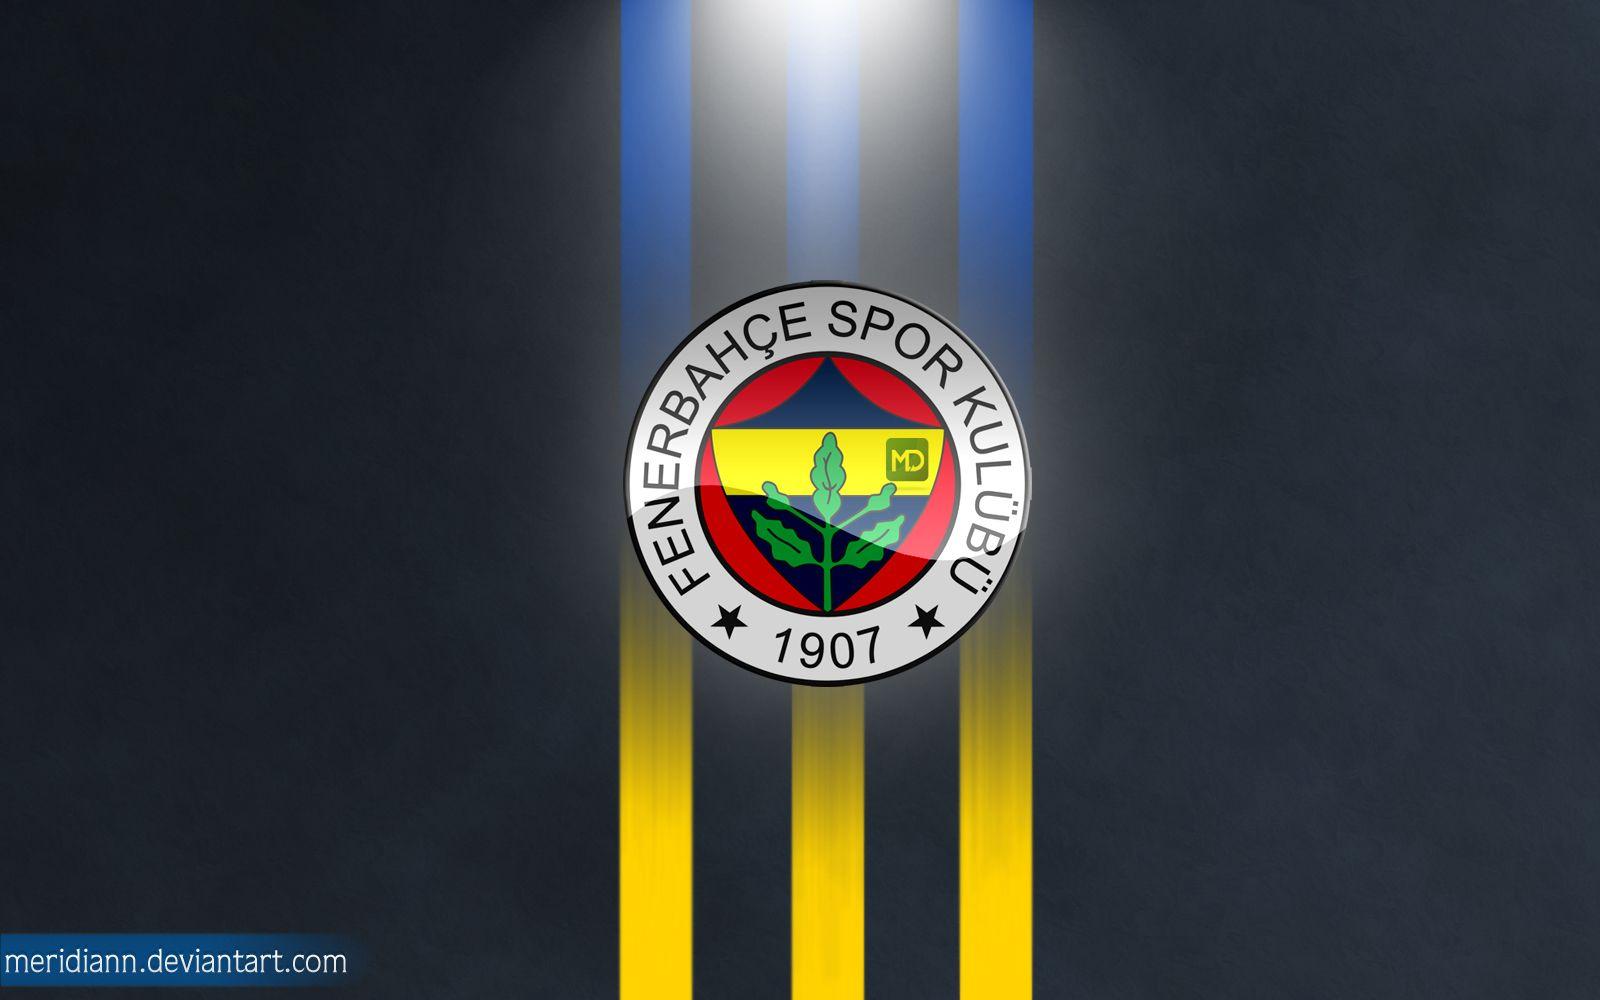 Wallpaper on FenerbahceFans